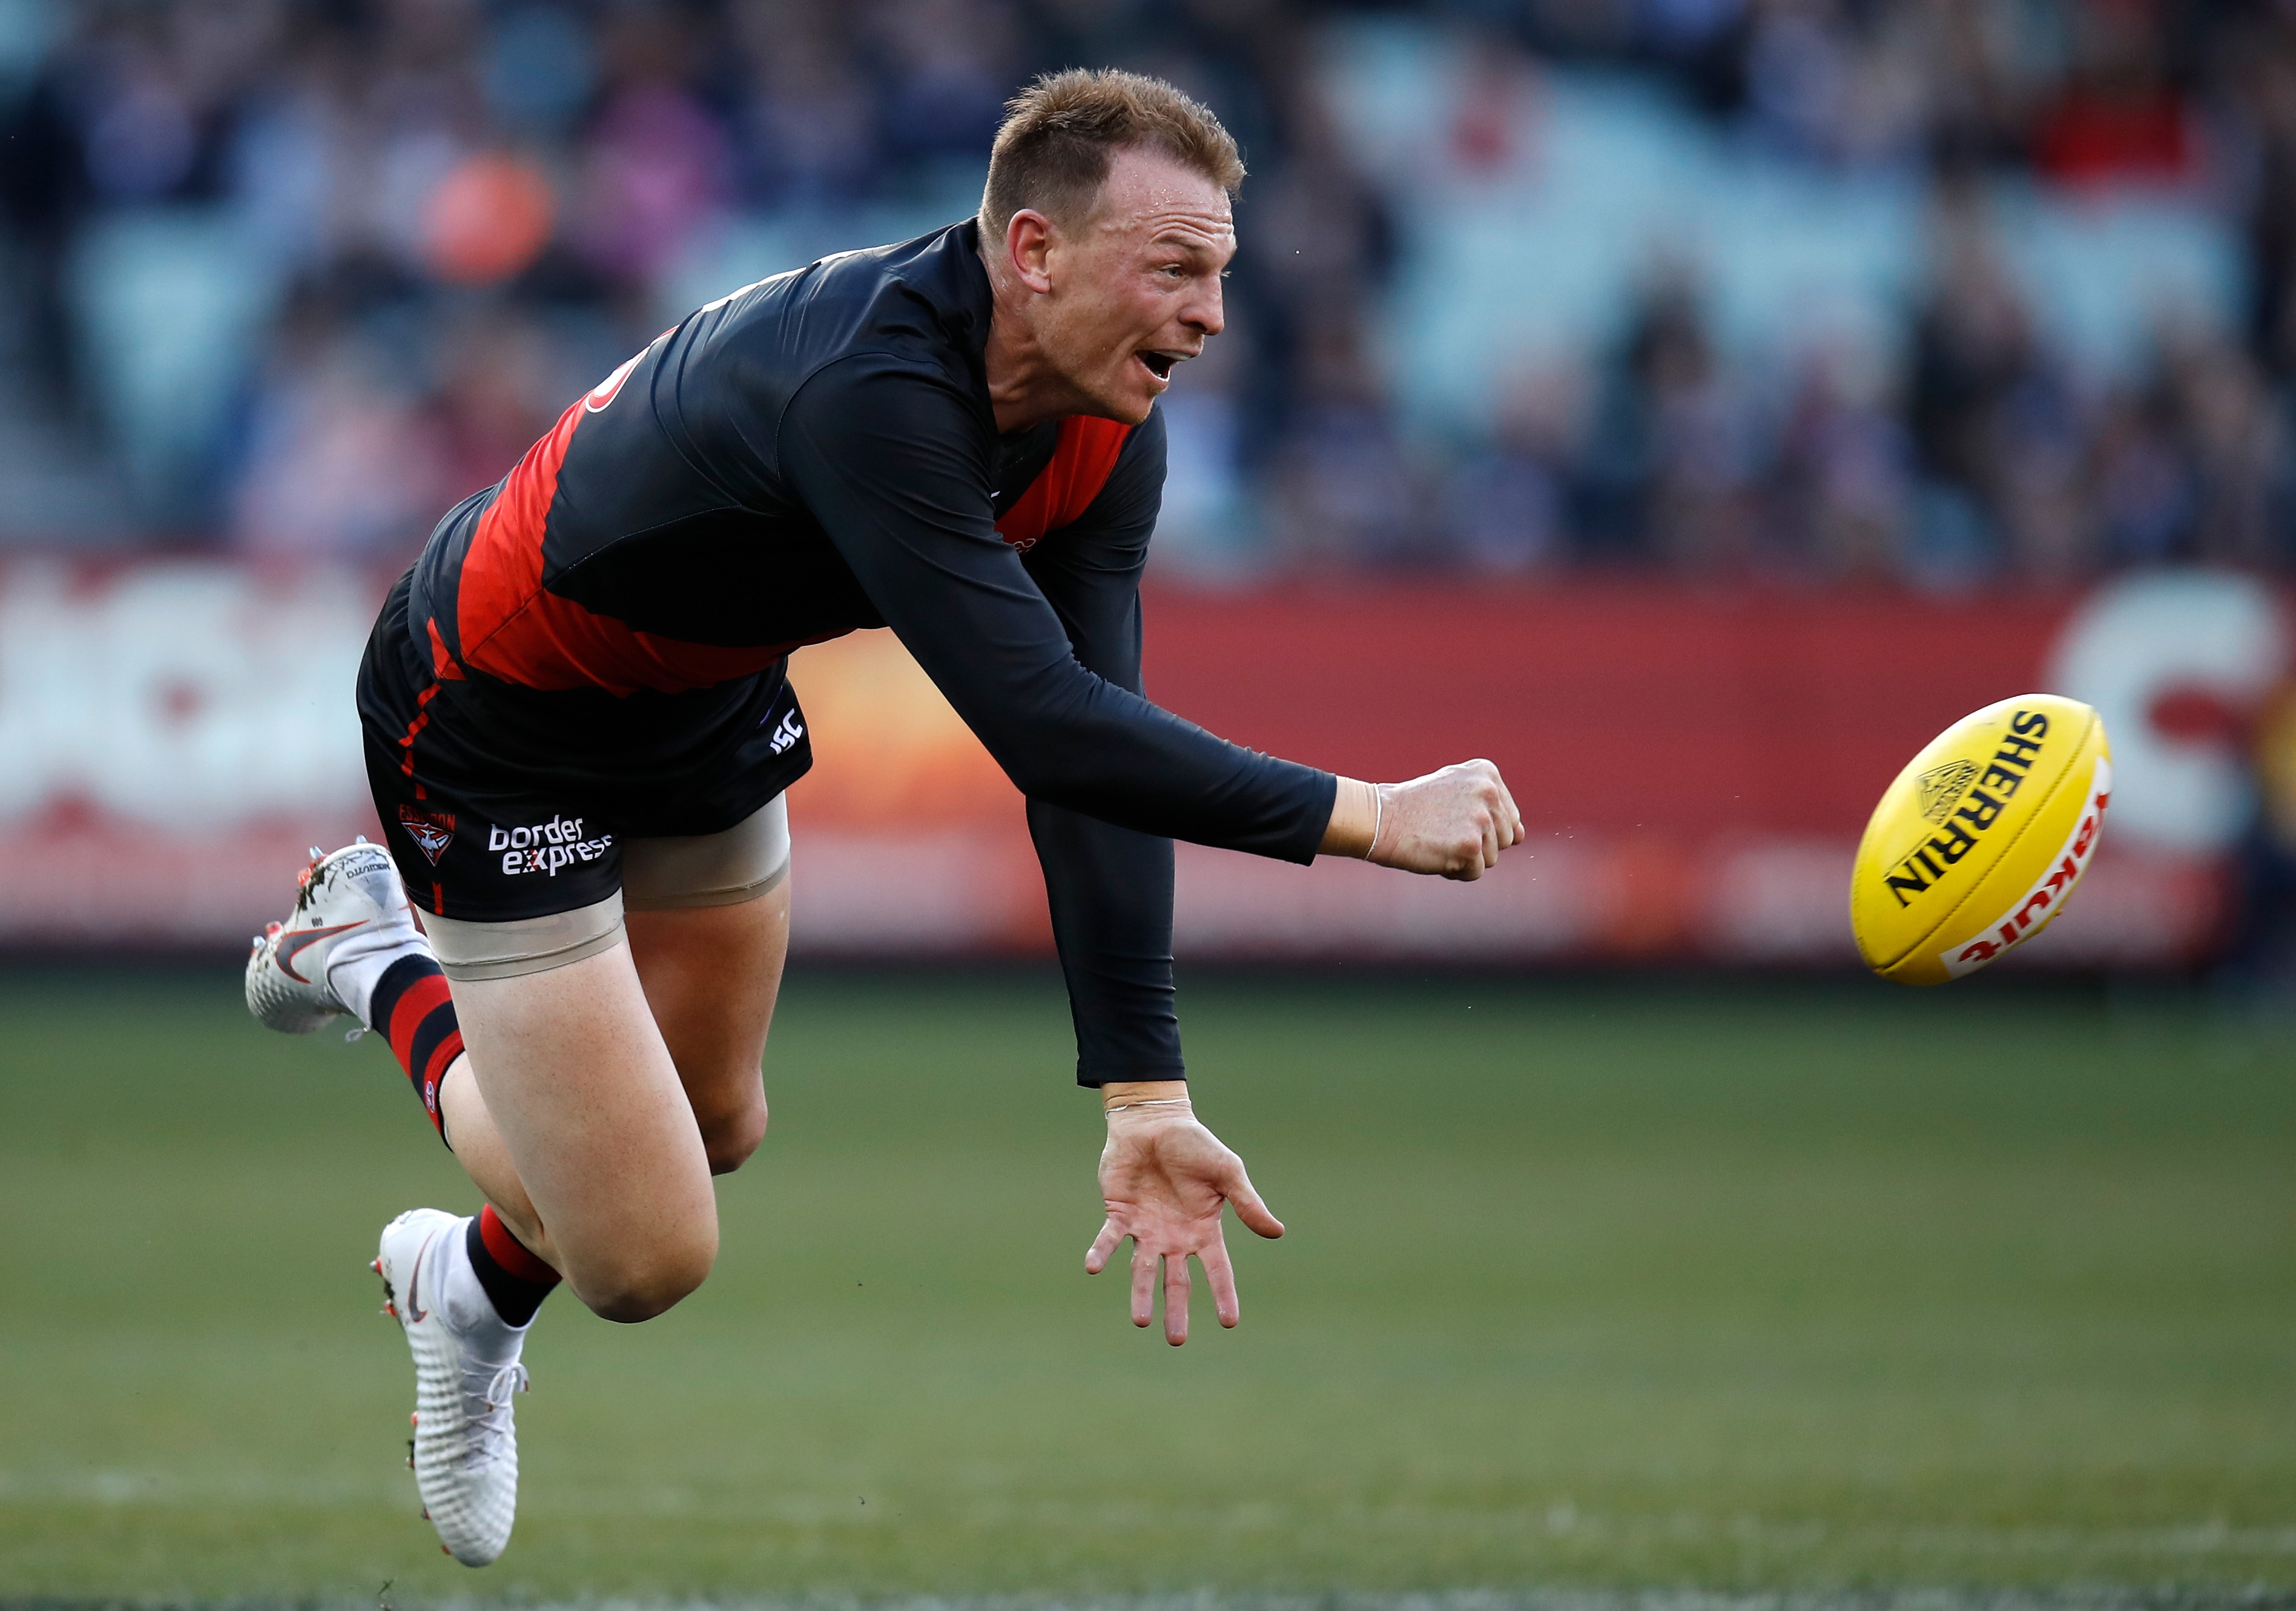 Brendon Goddard of the Bombers during a match against Collingwood at the MCG in 2018. Photo: Michael Willson